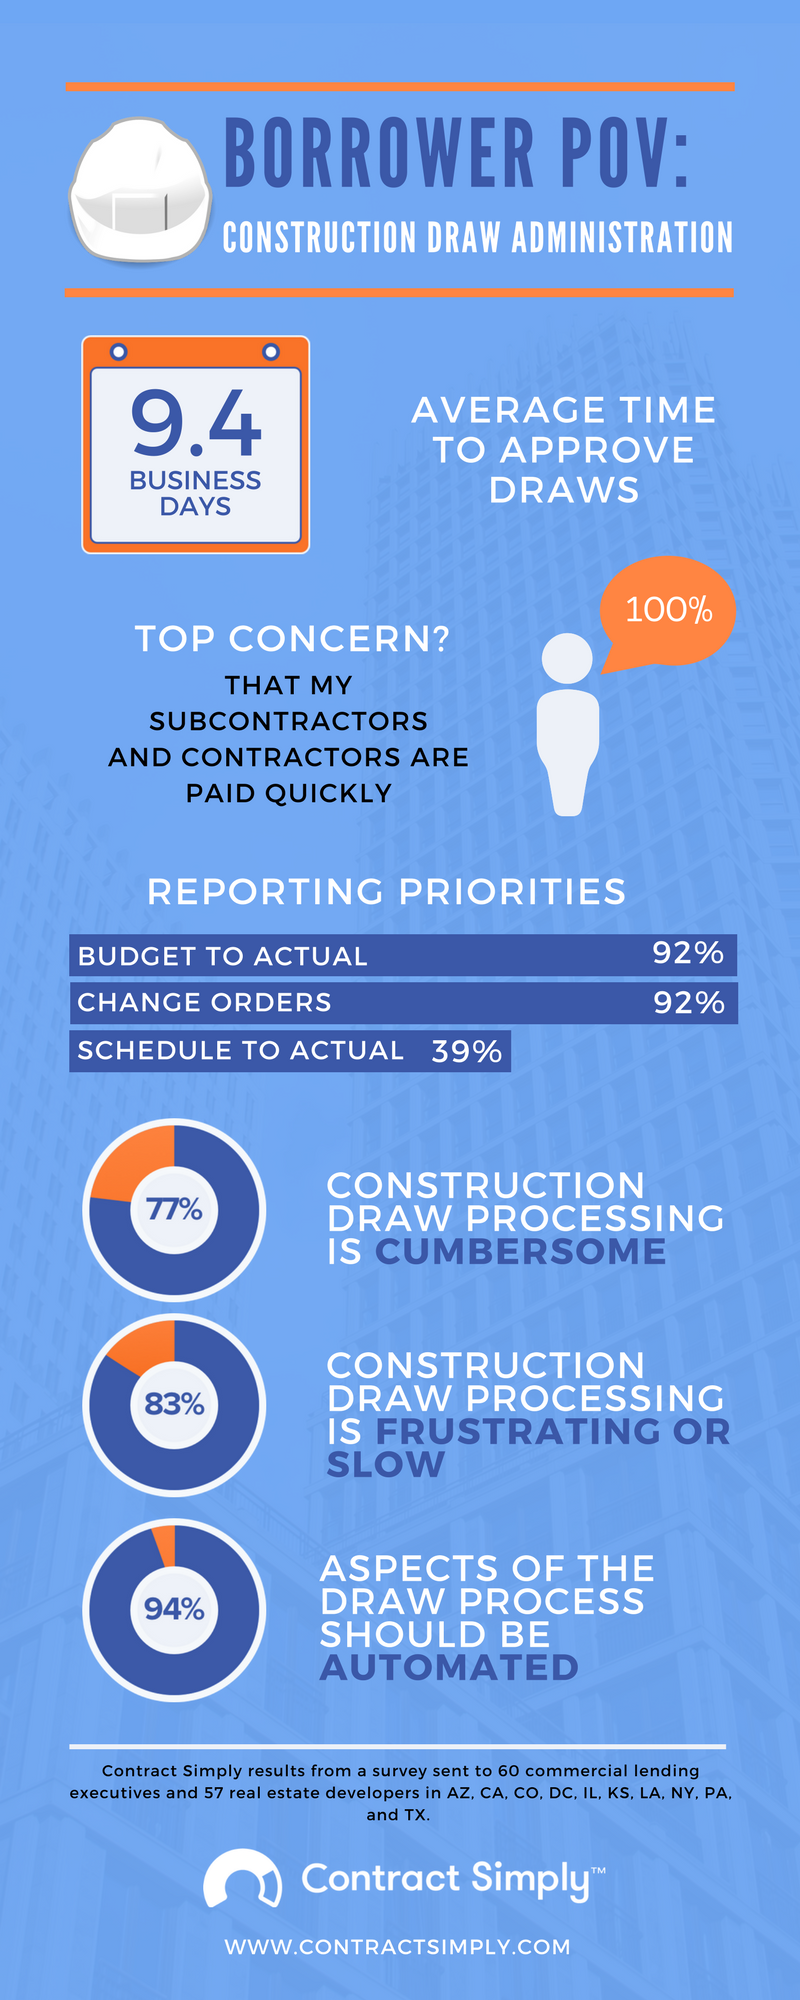 Contract Simply Construction Loan Administration Infographic - Borrower